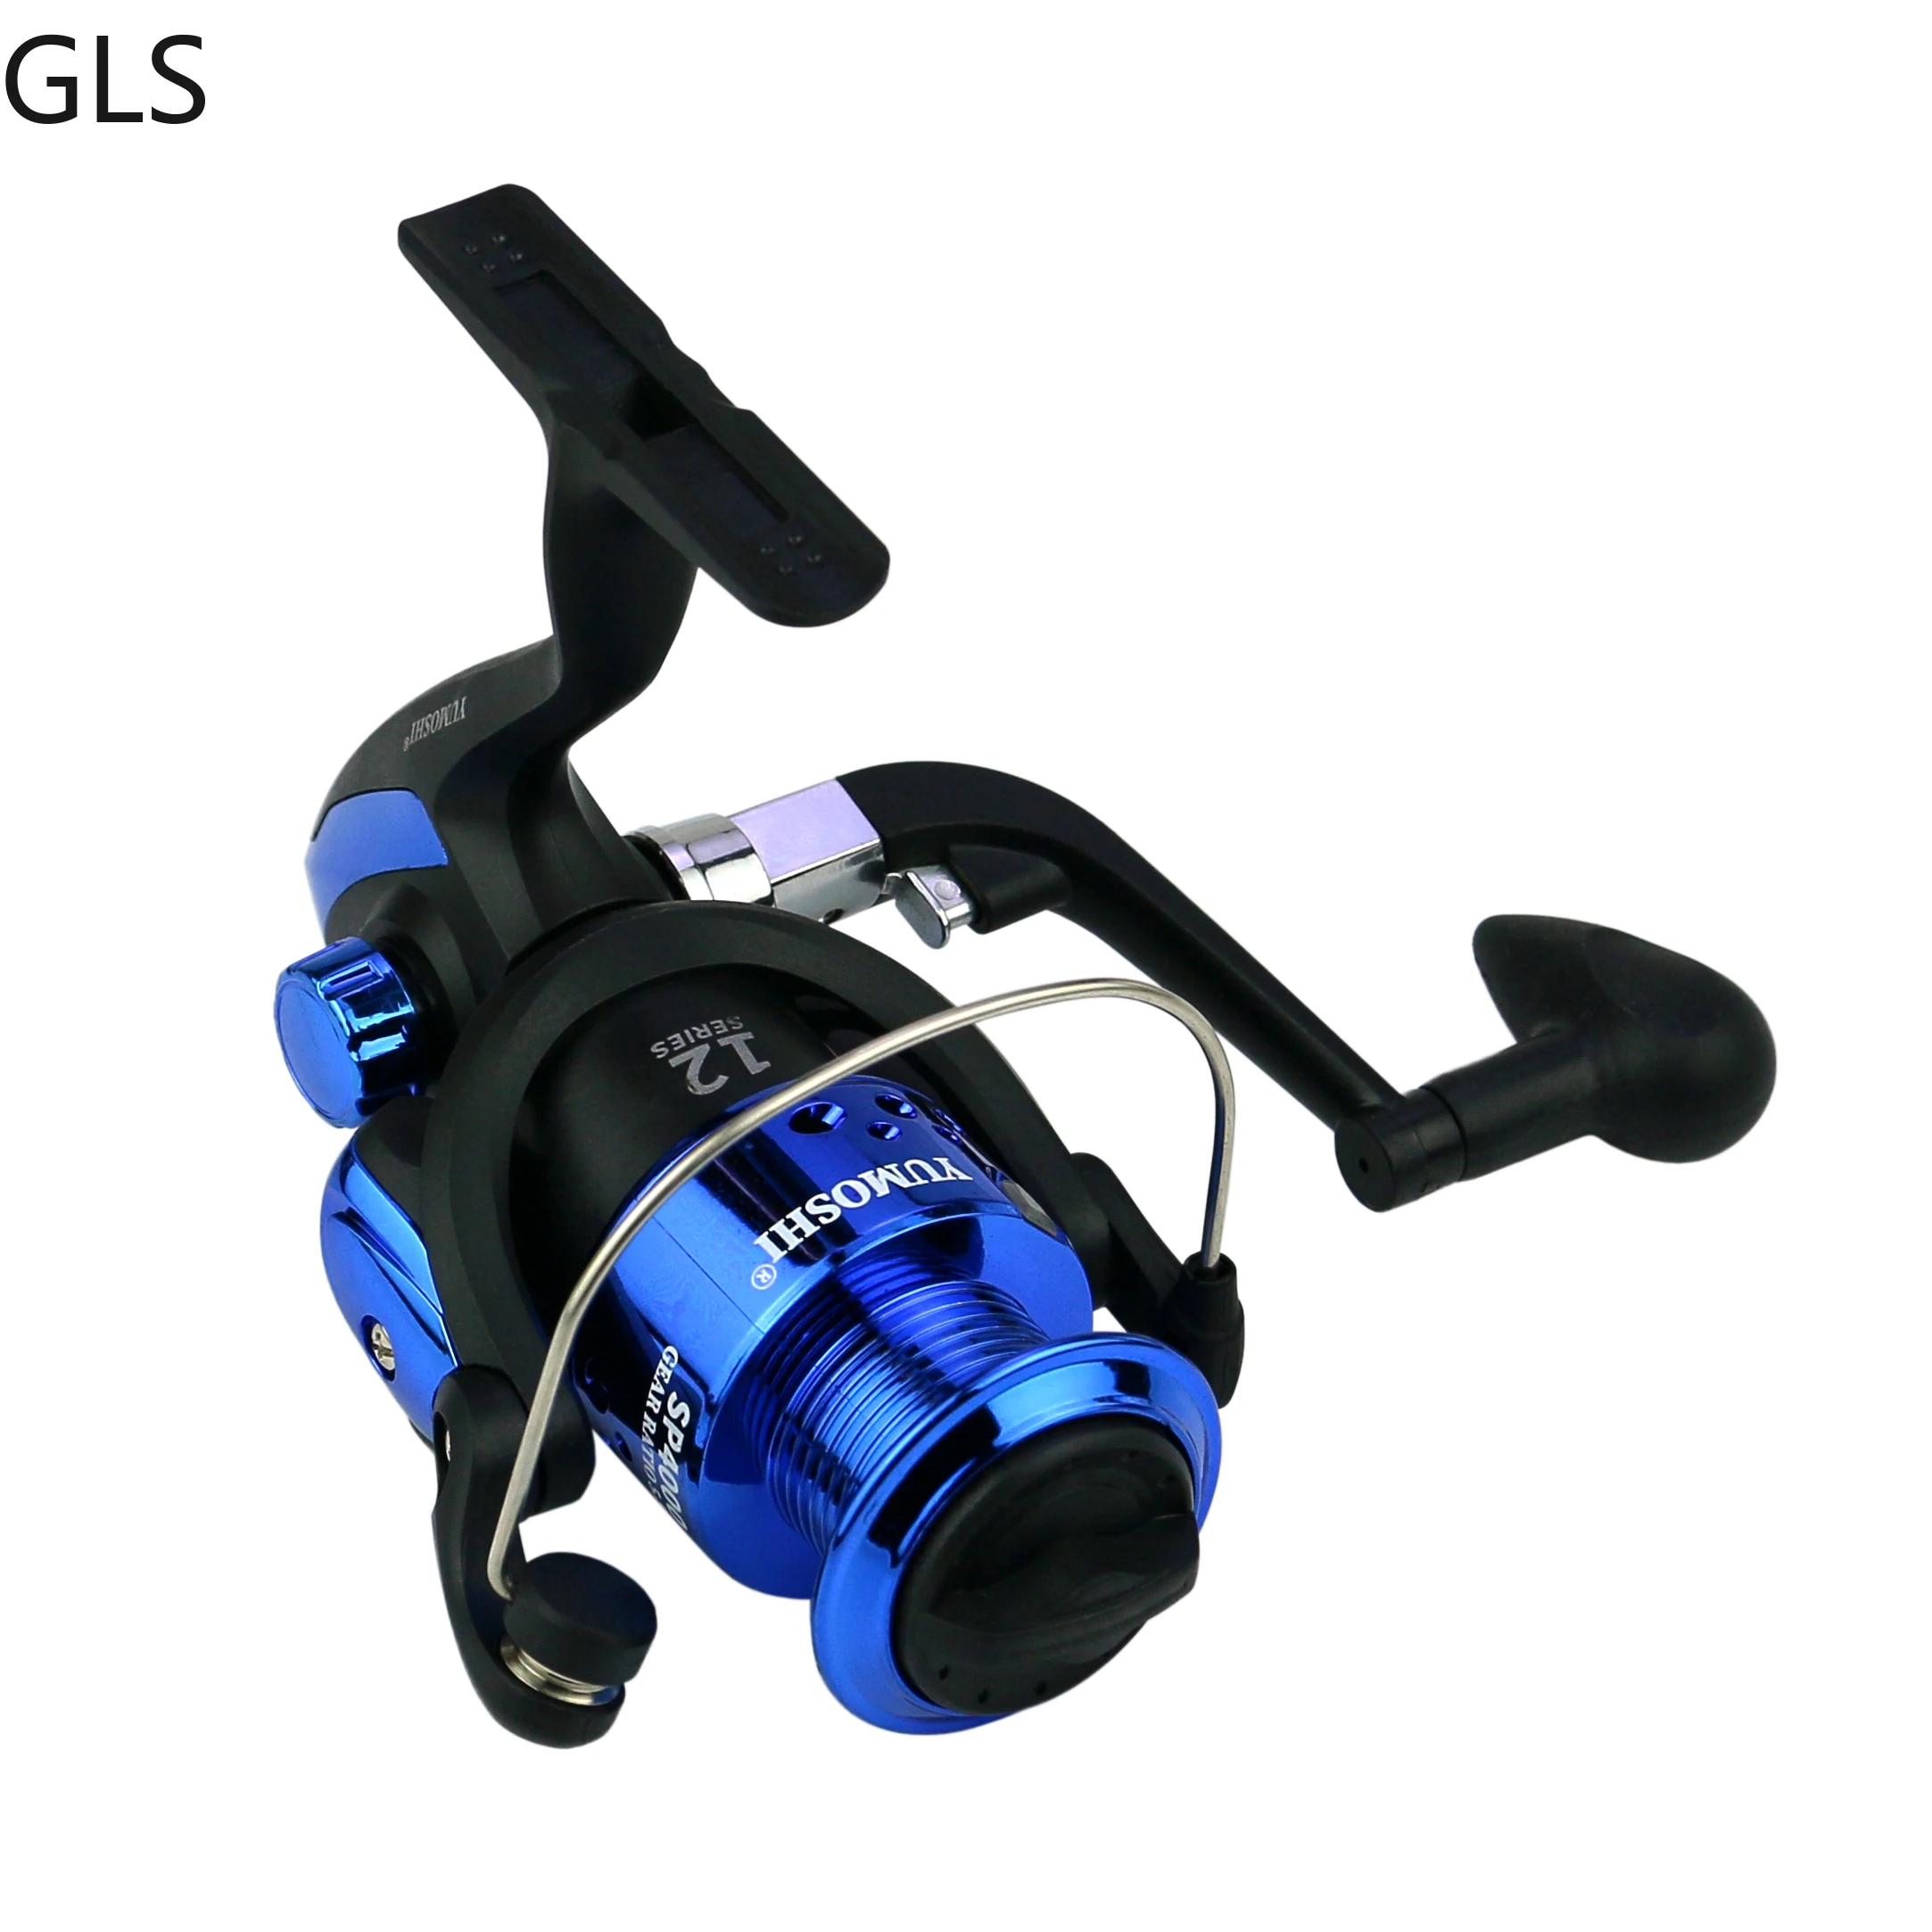 High Quality 5.5:1 Ultra Light Freshwater Carp Fishing Reel Tackle 3000-7000 Left/Right Interchangeable Spinning Wheel enlarge